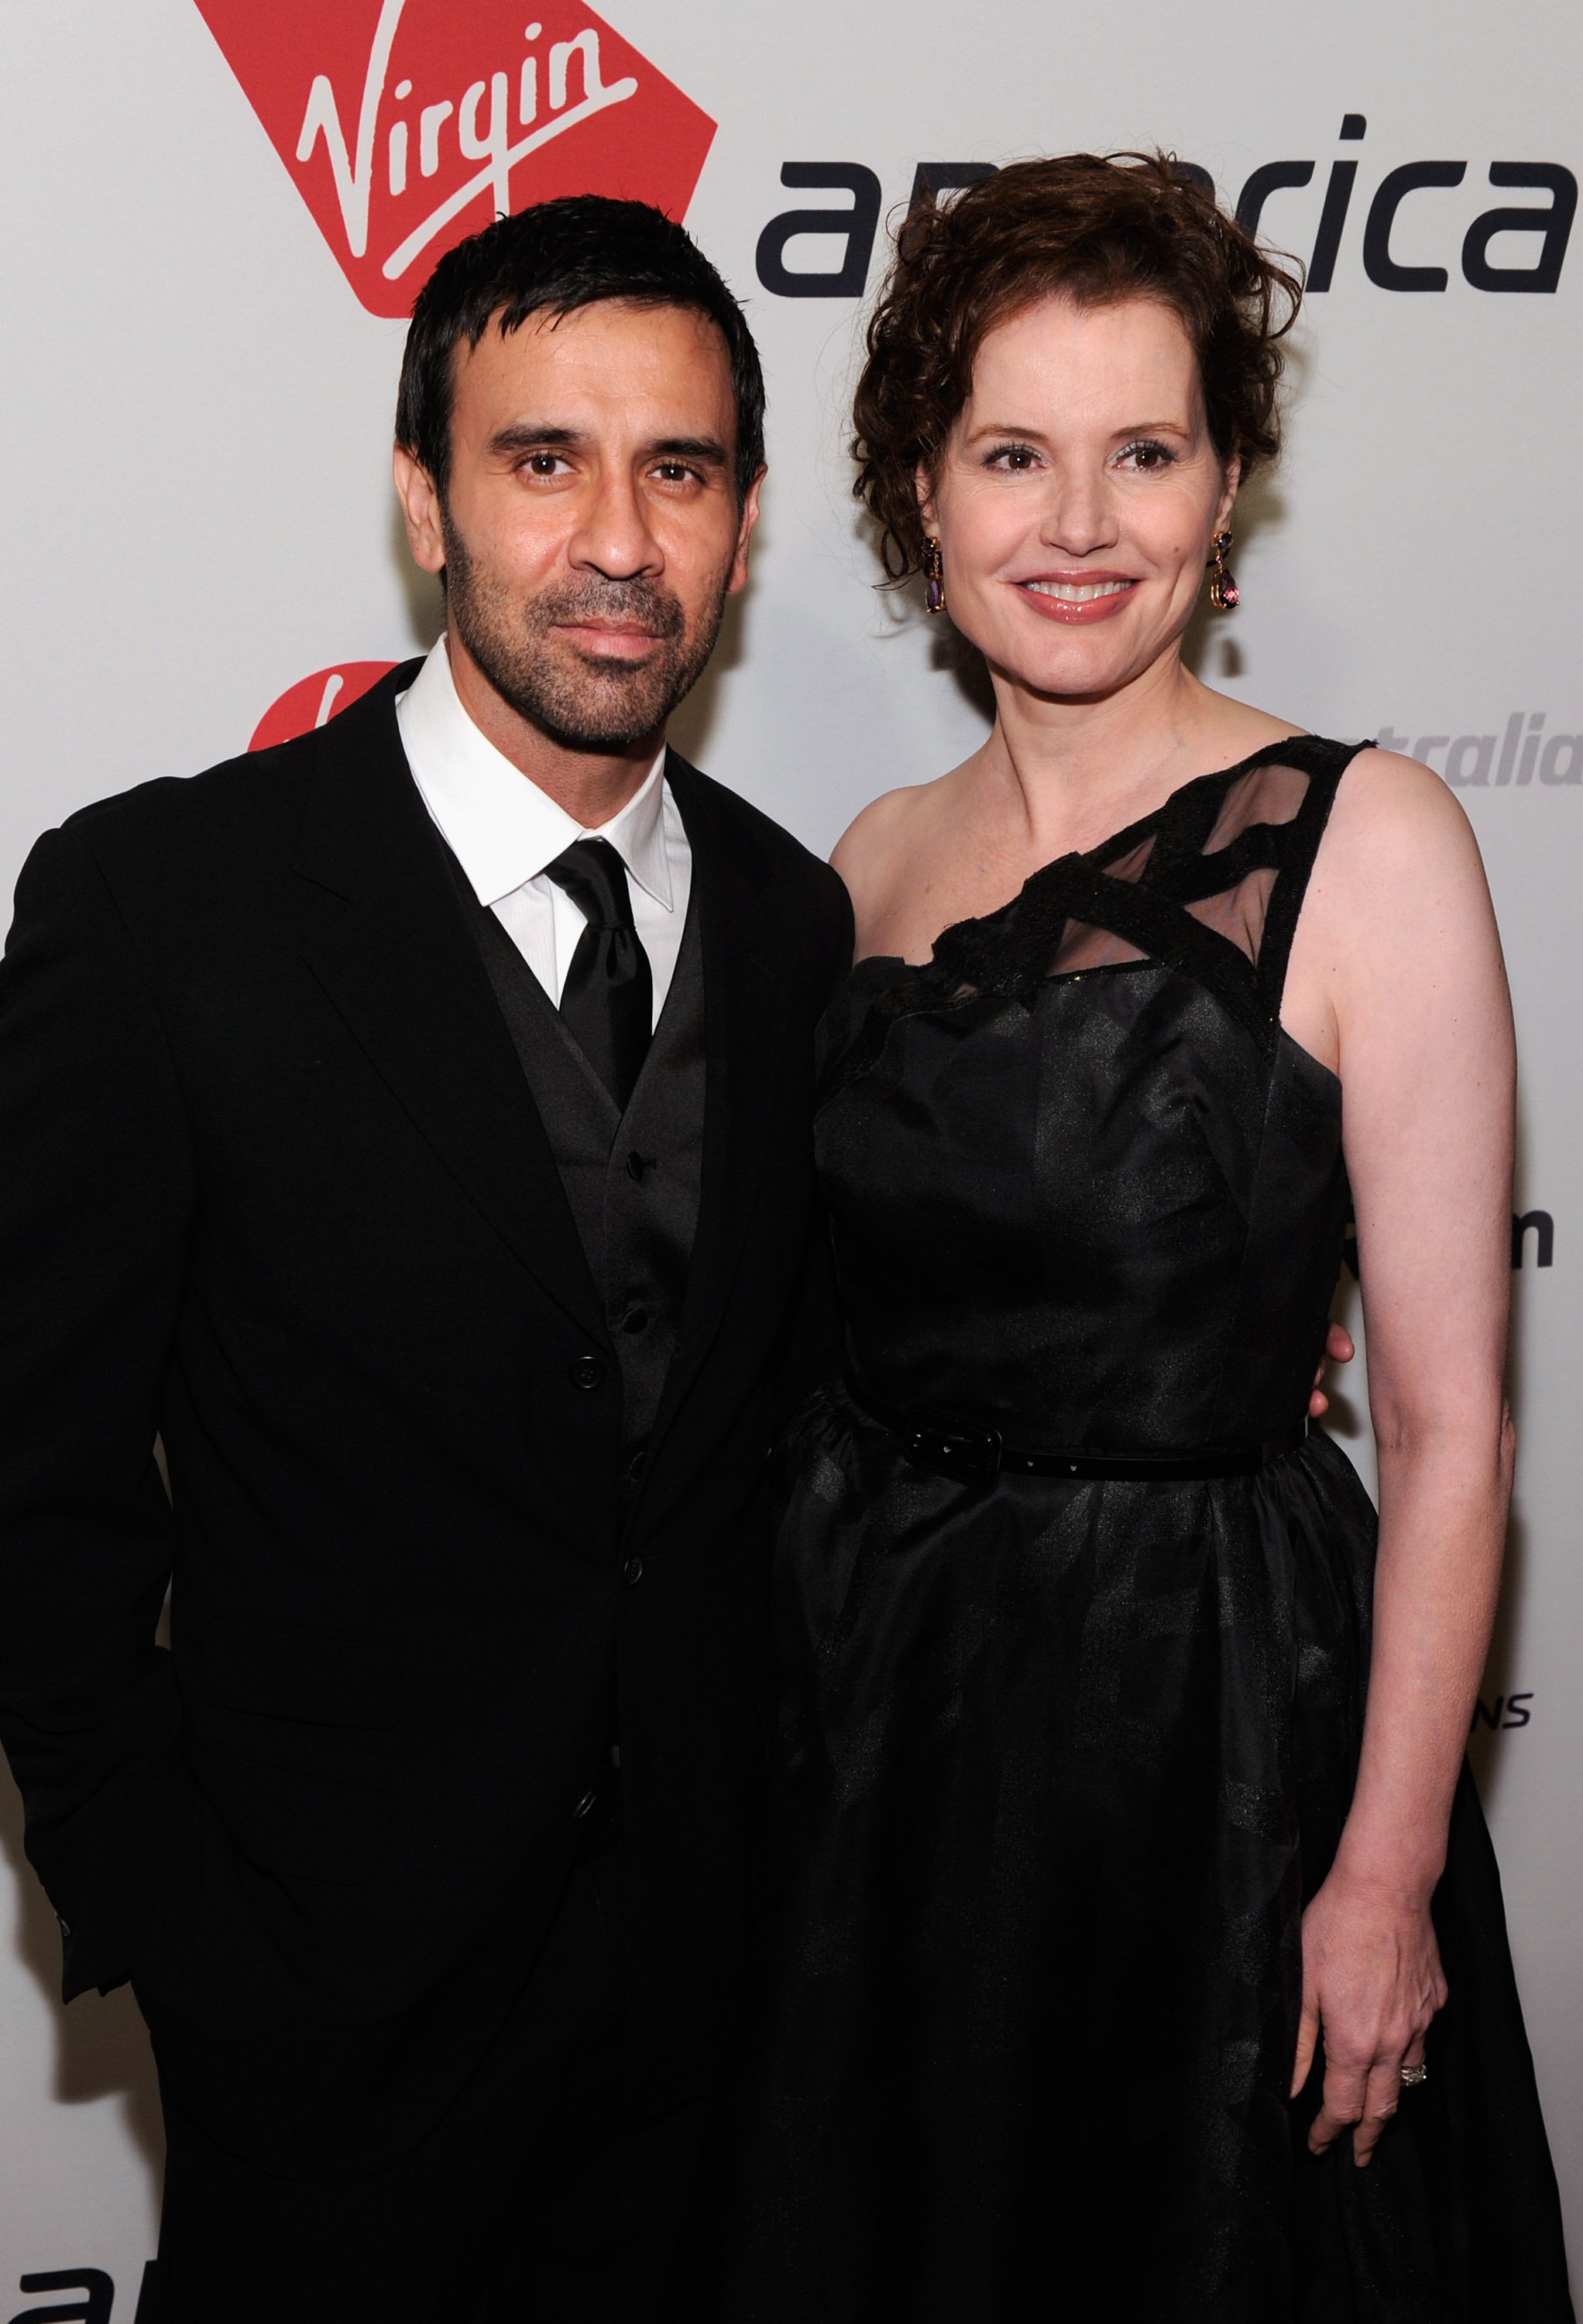 Geena Davis and Reza Jarrahy at the 5th Annual Rock The Kasbah Gala in support of Virgin Unite and the Eve Branson Foundation at Boulevard3 on November 16, 2011 in Hollywood, California.  / Source: Getty Images